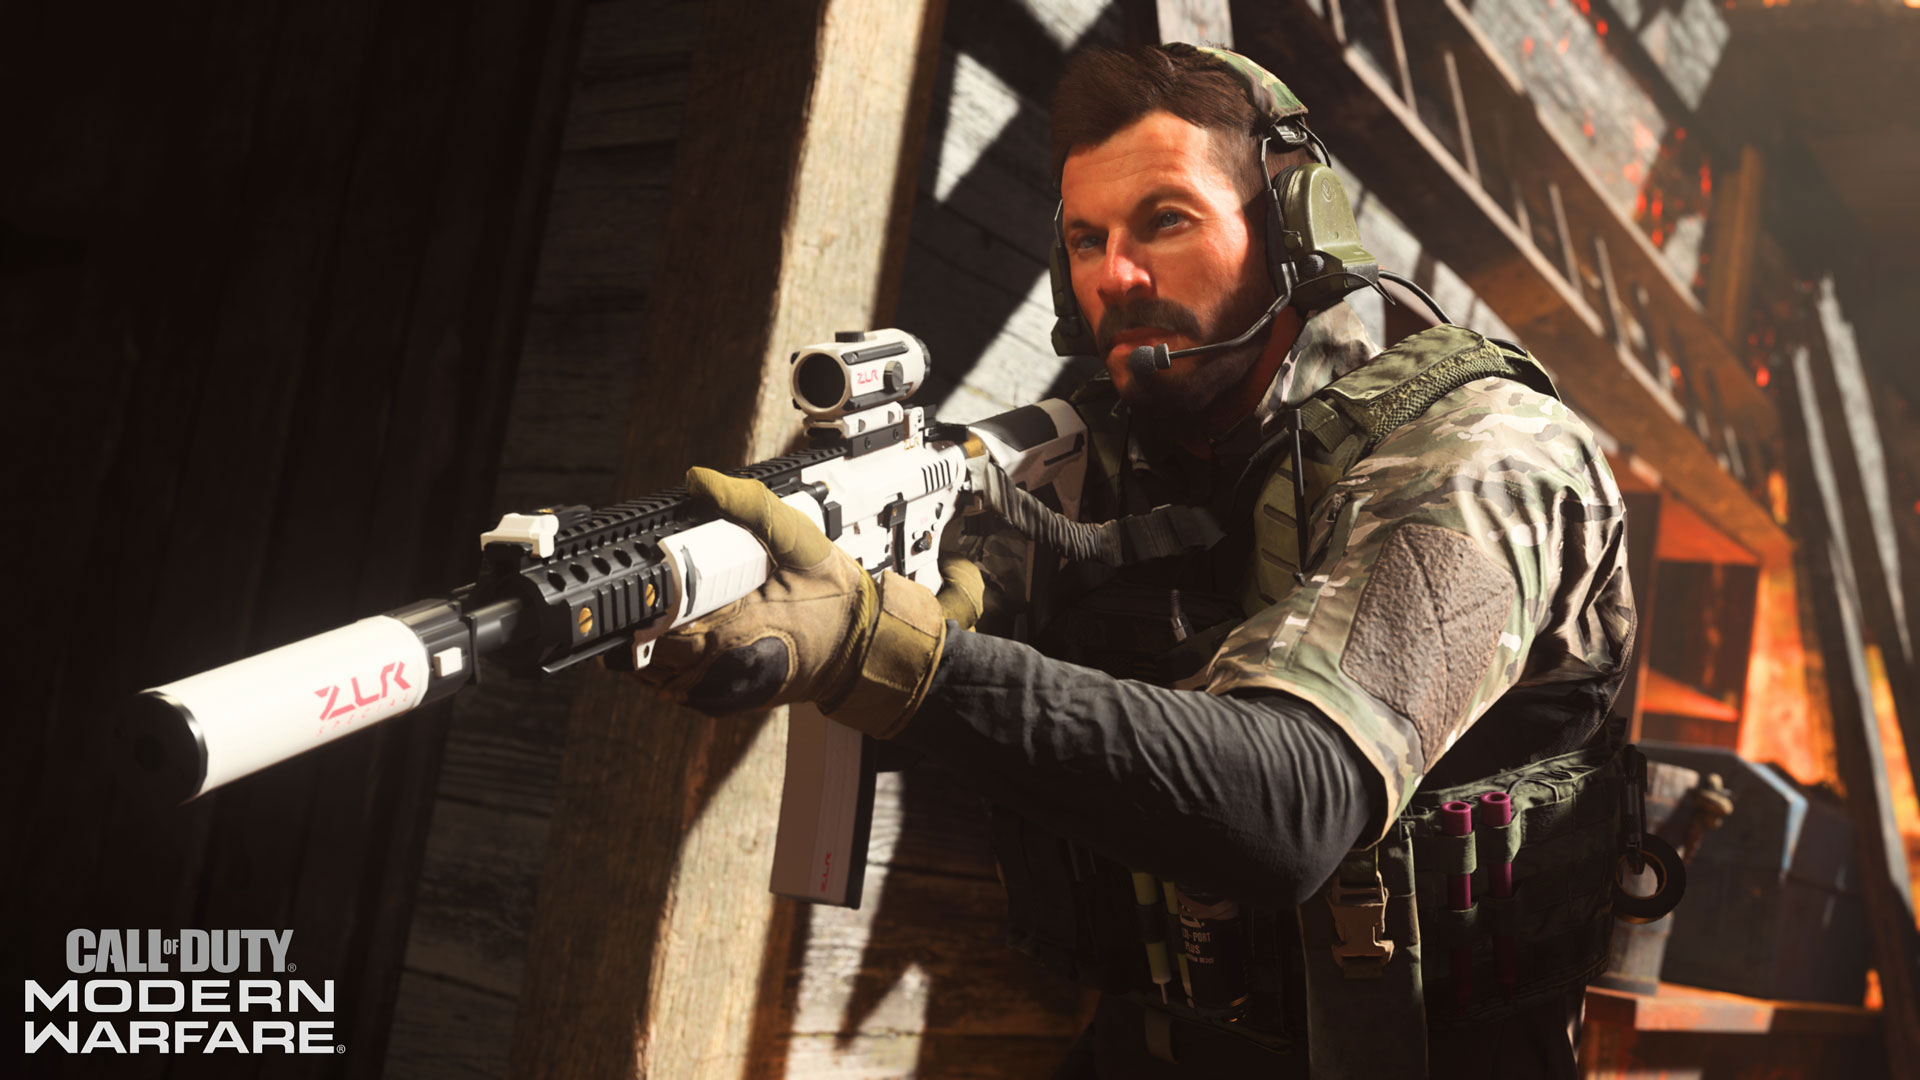 Call of Duty: Elite confirmed as premium-tier service, MW3